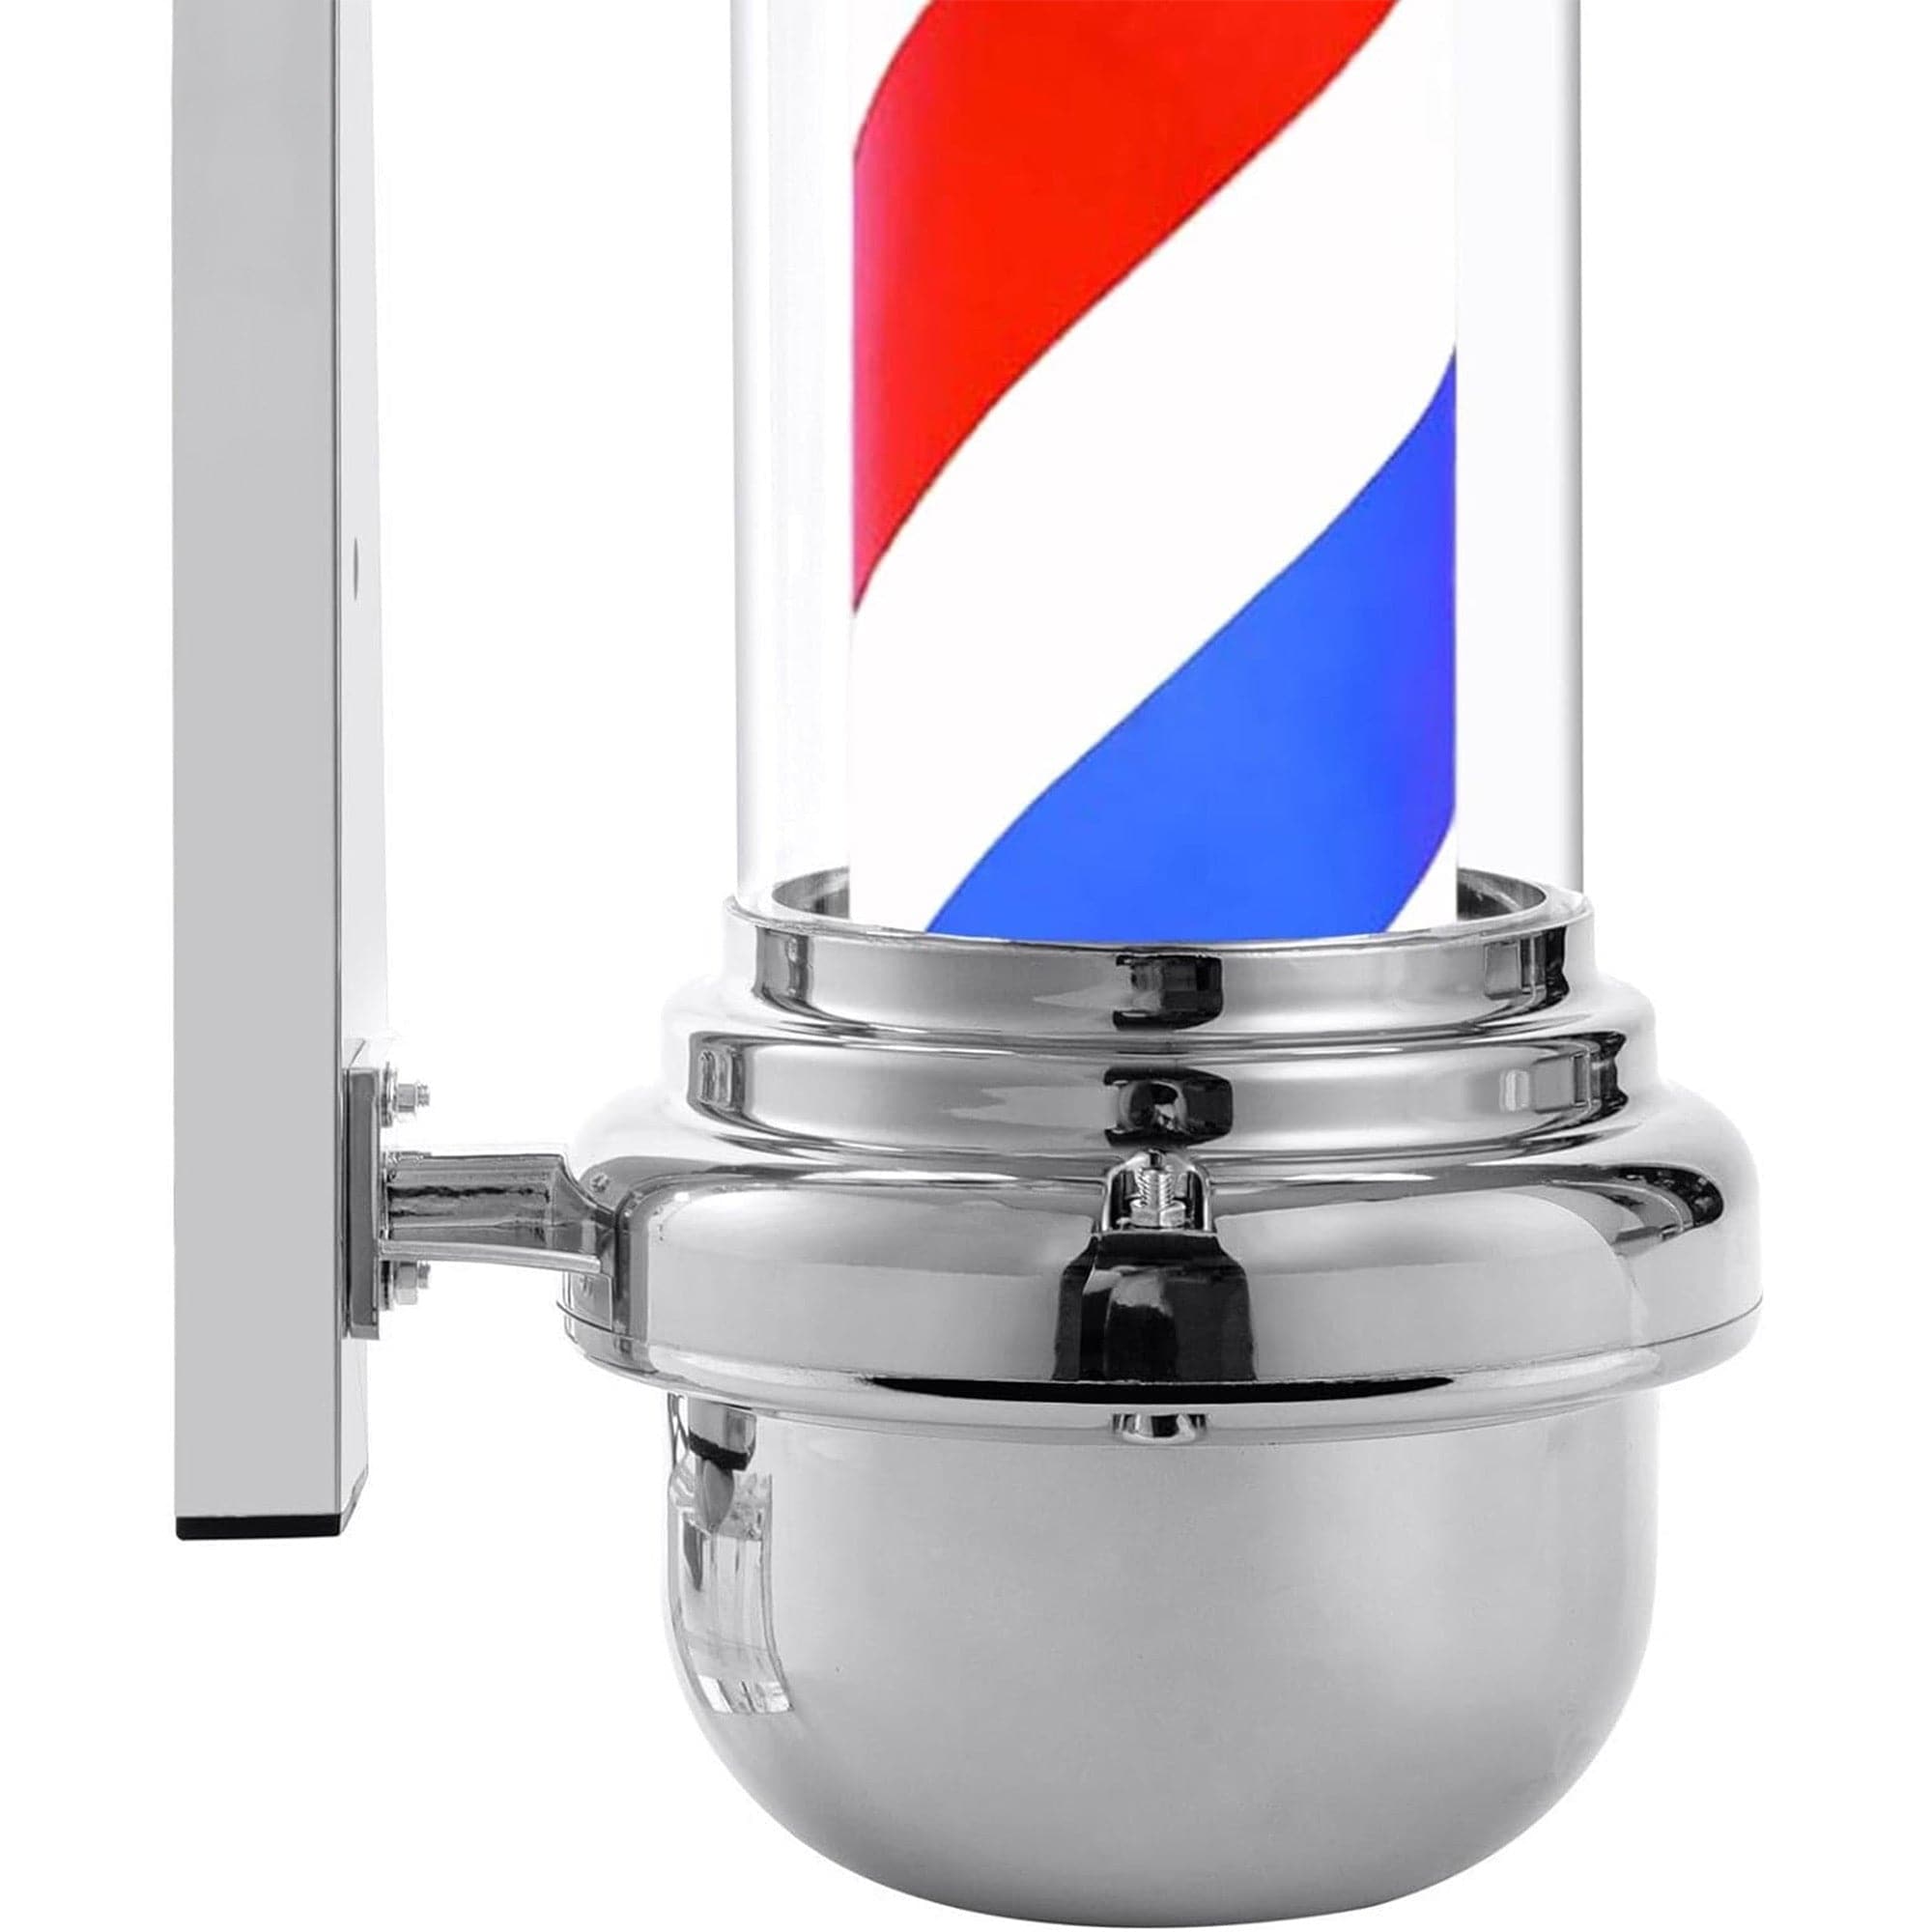 Gabri - Classic Barber Pole Light With Open Sign (Silver Red White Blue Stripes) 85cm